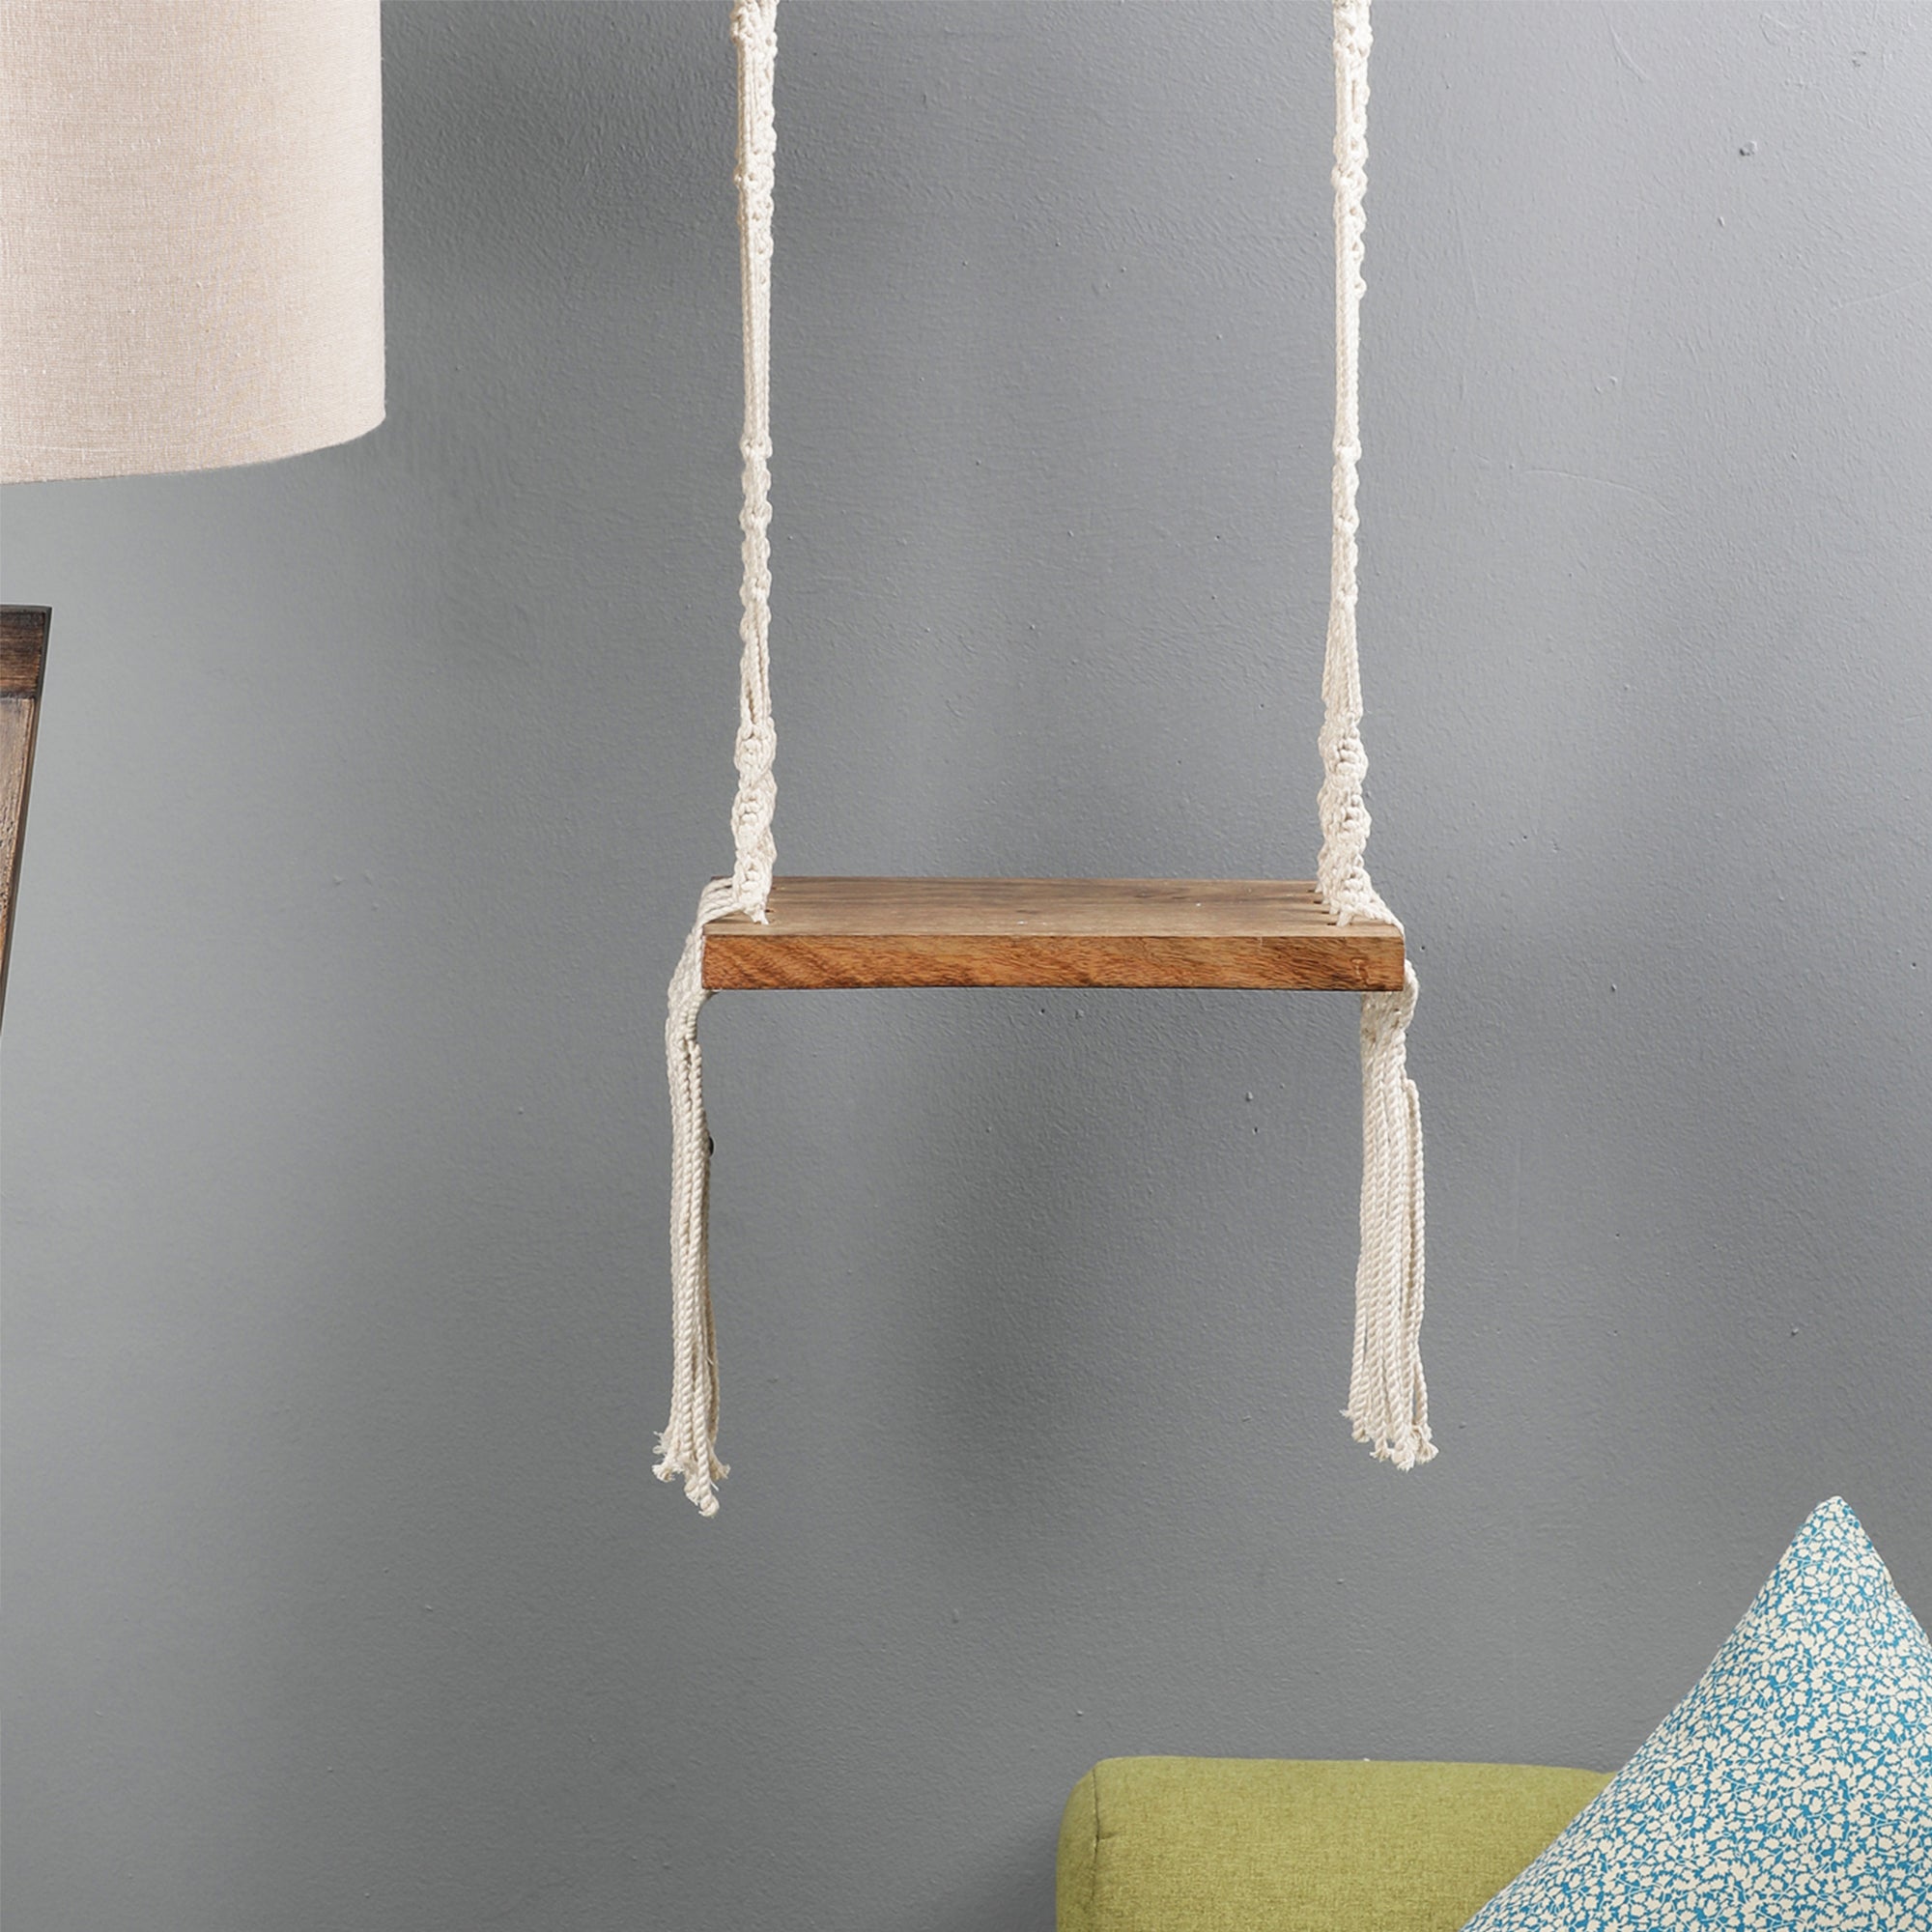 Wall Hanging Shelf with Macrame And Fringes